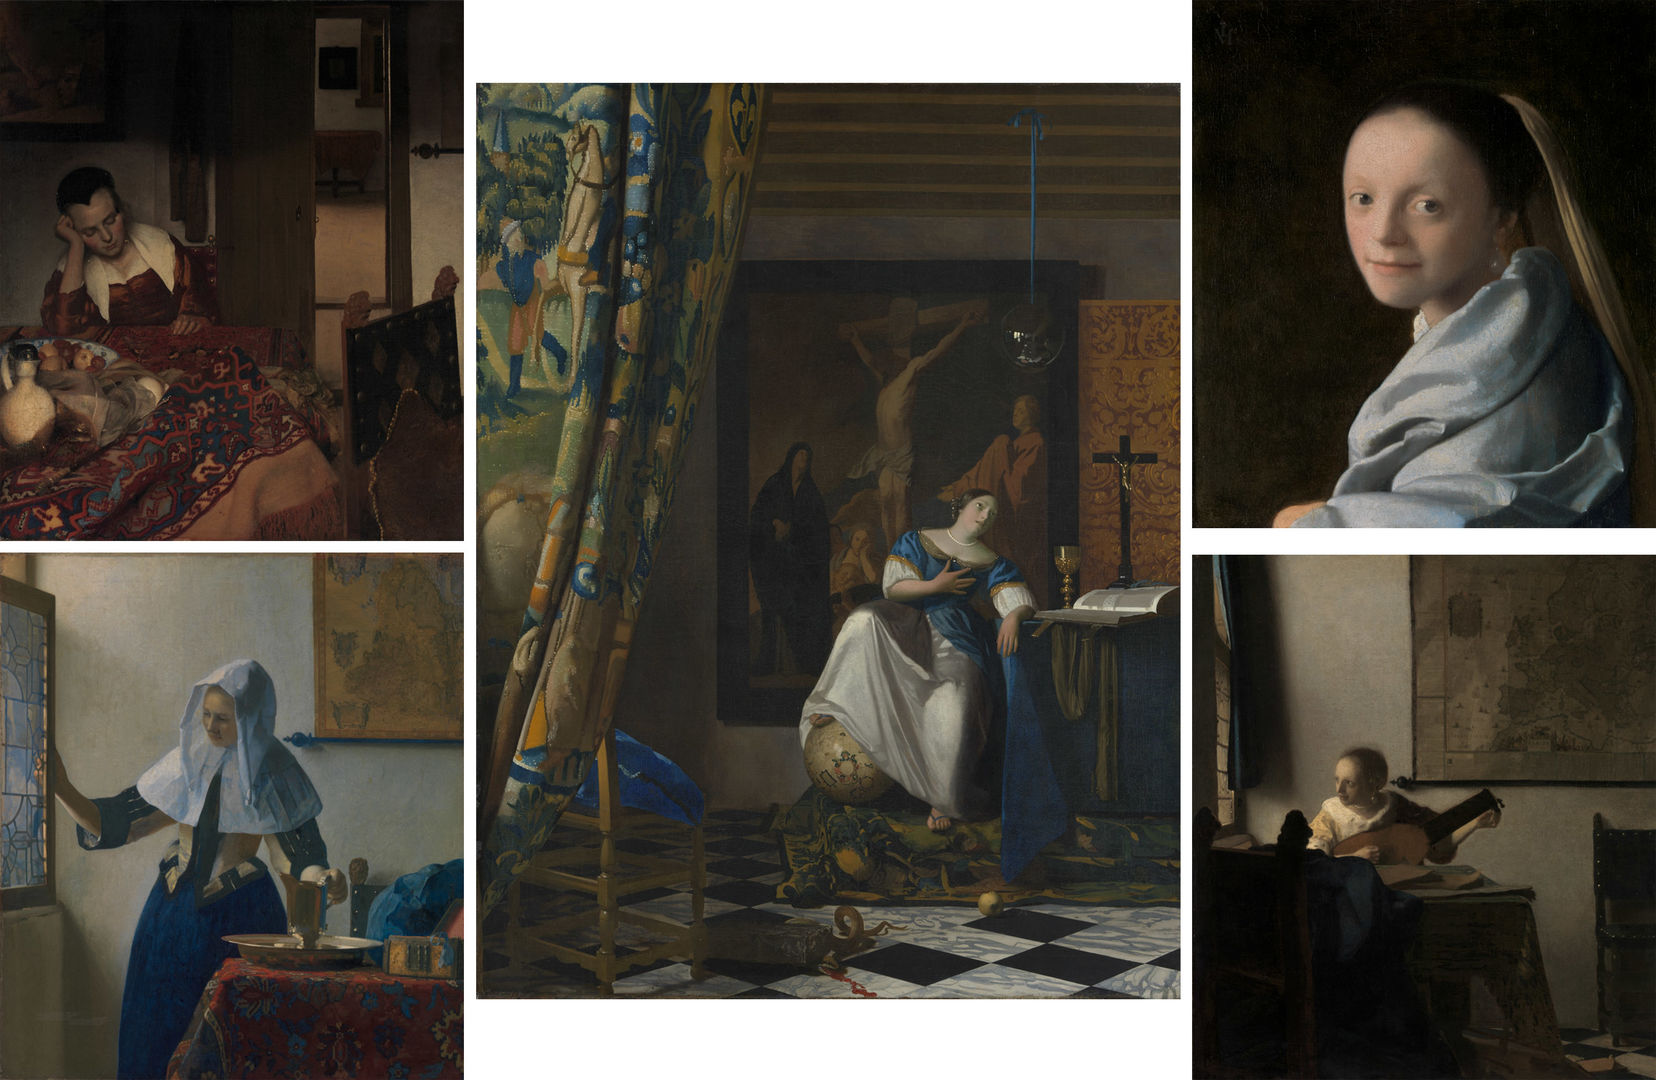 Images of five masterpiece paintings by Johannes Vermeer, all from The Met collection